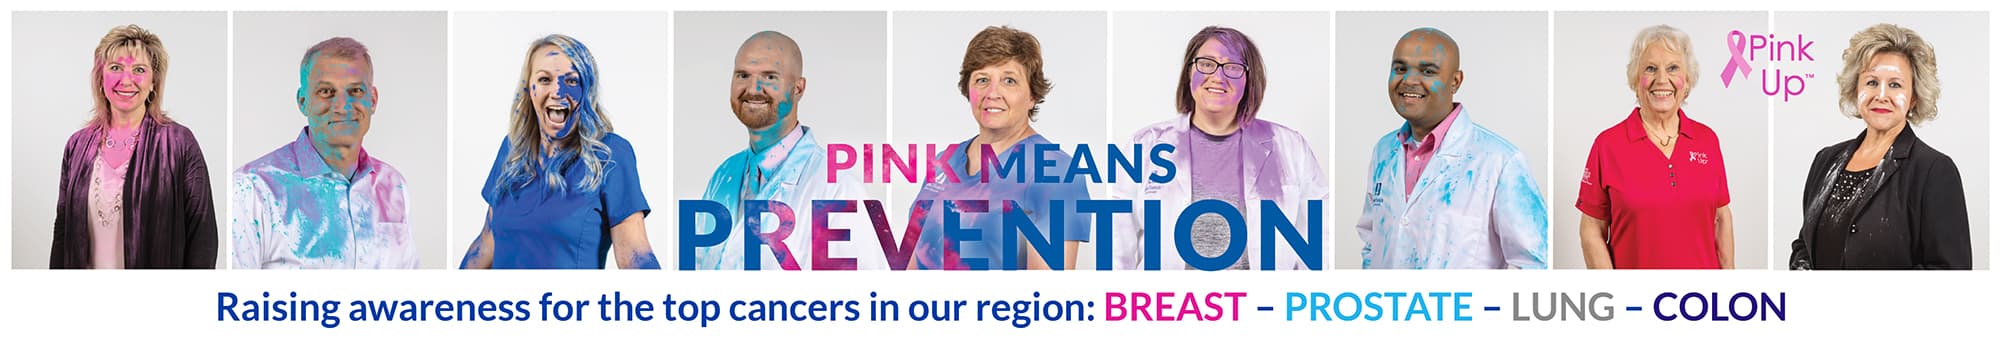 Pink Means Prevention - Raising awareness for the top cancers in our region: breast, prostate, lung and colon